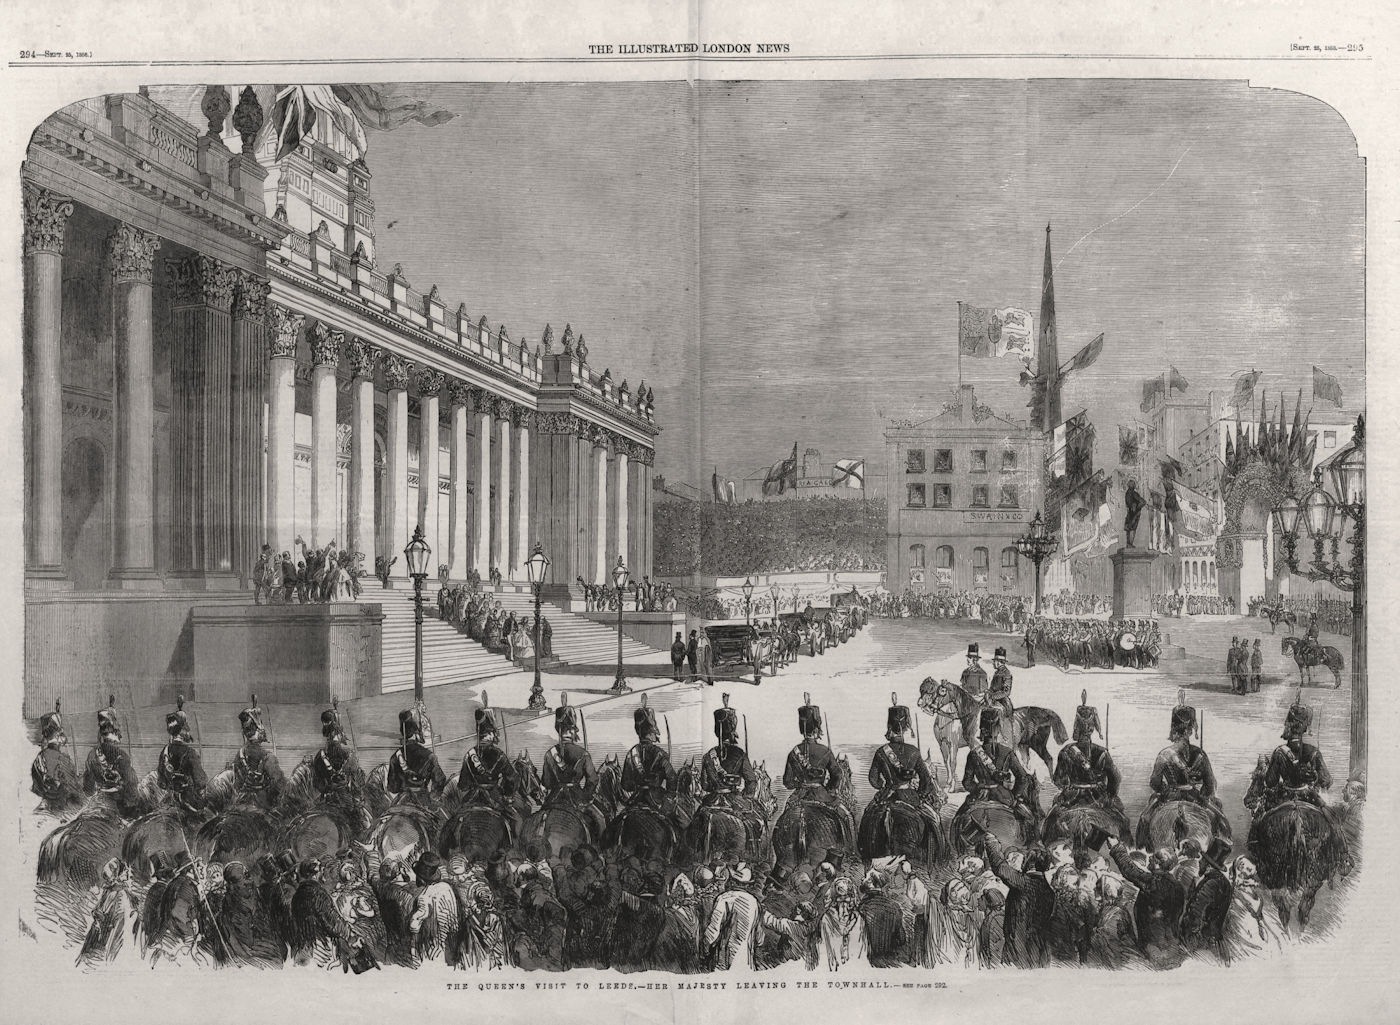 Queen Victoria's visit to Leeds. Leaving the town hall. Yorkshire 1858 print